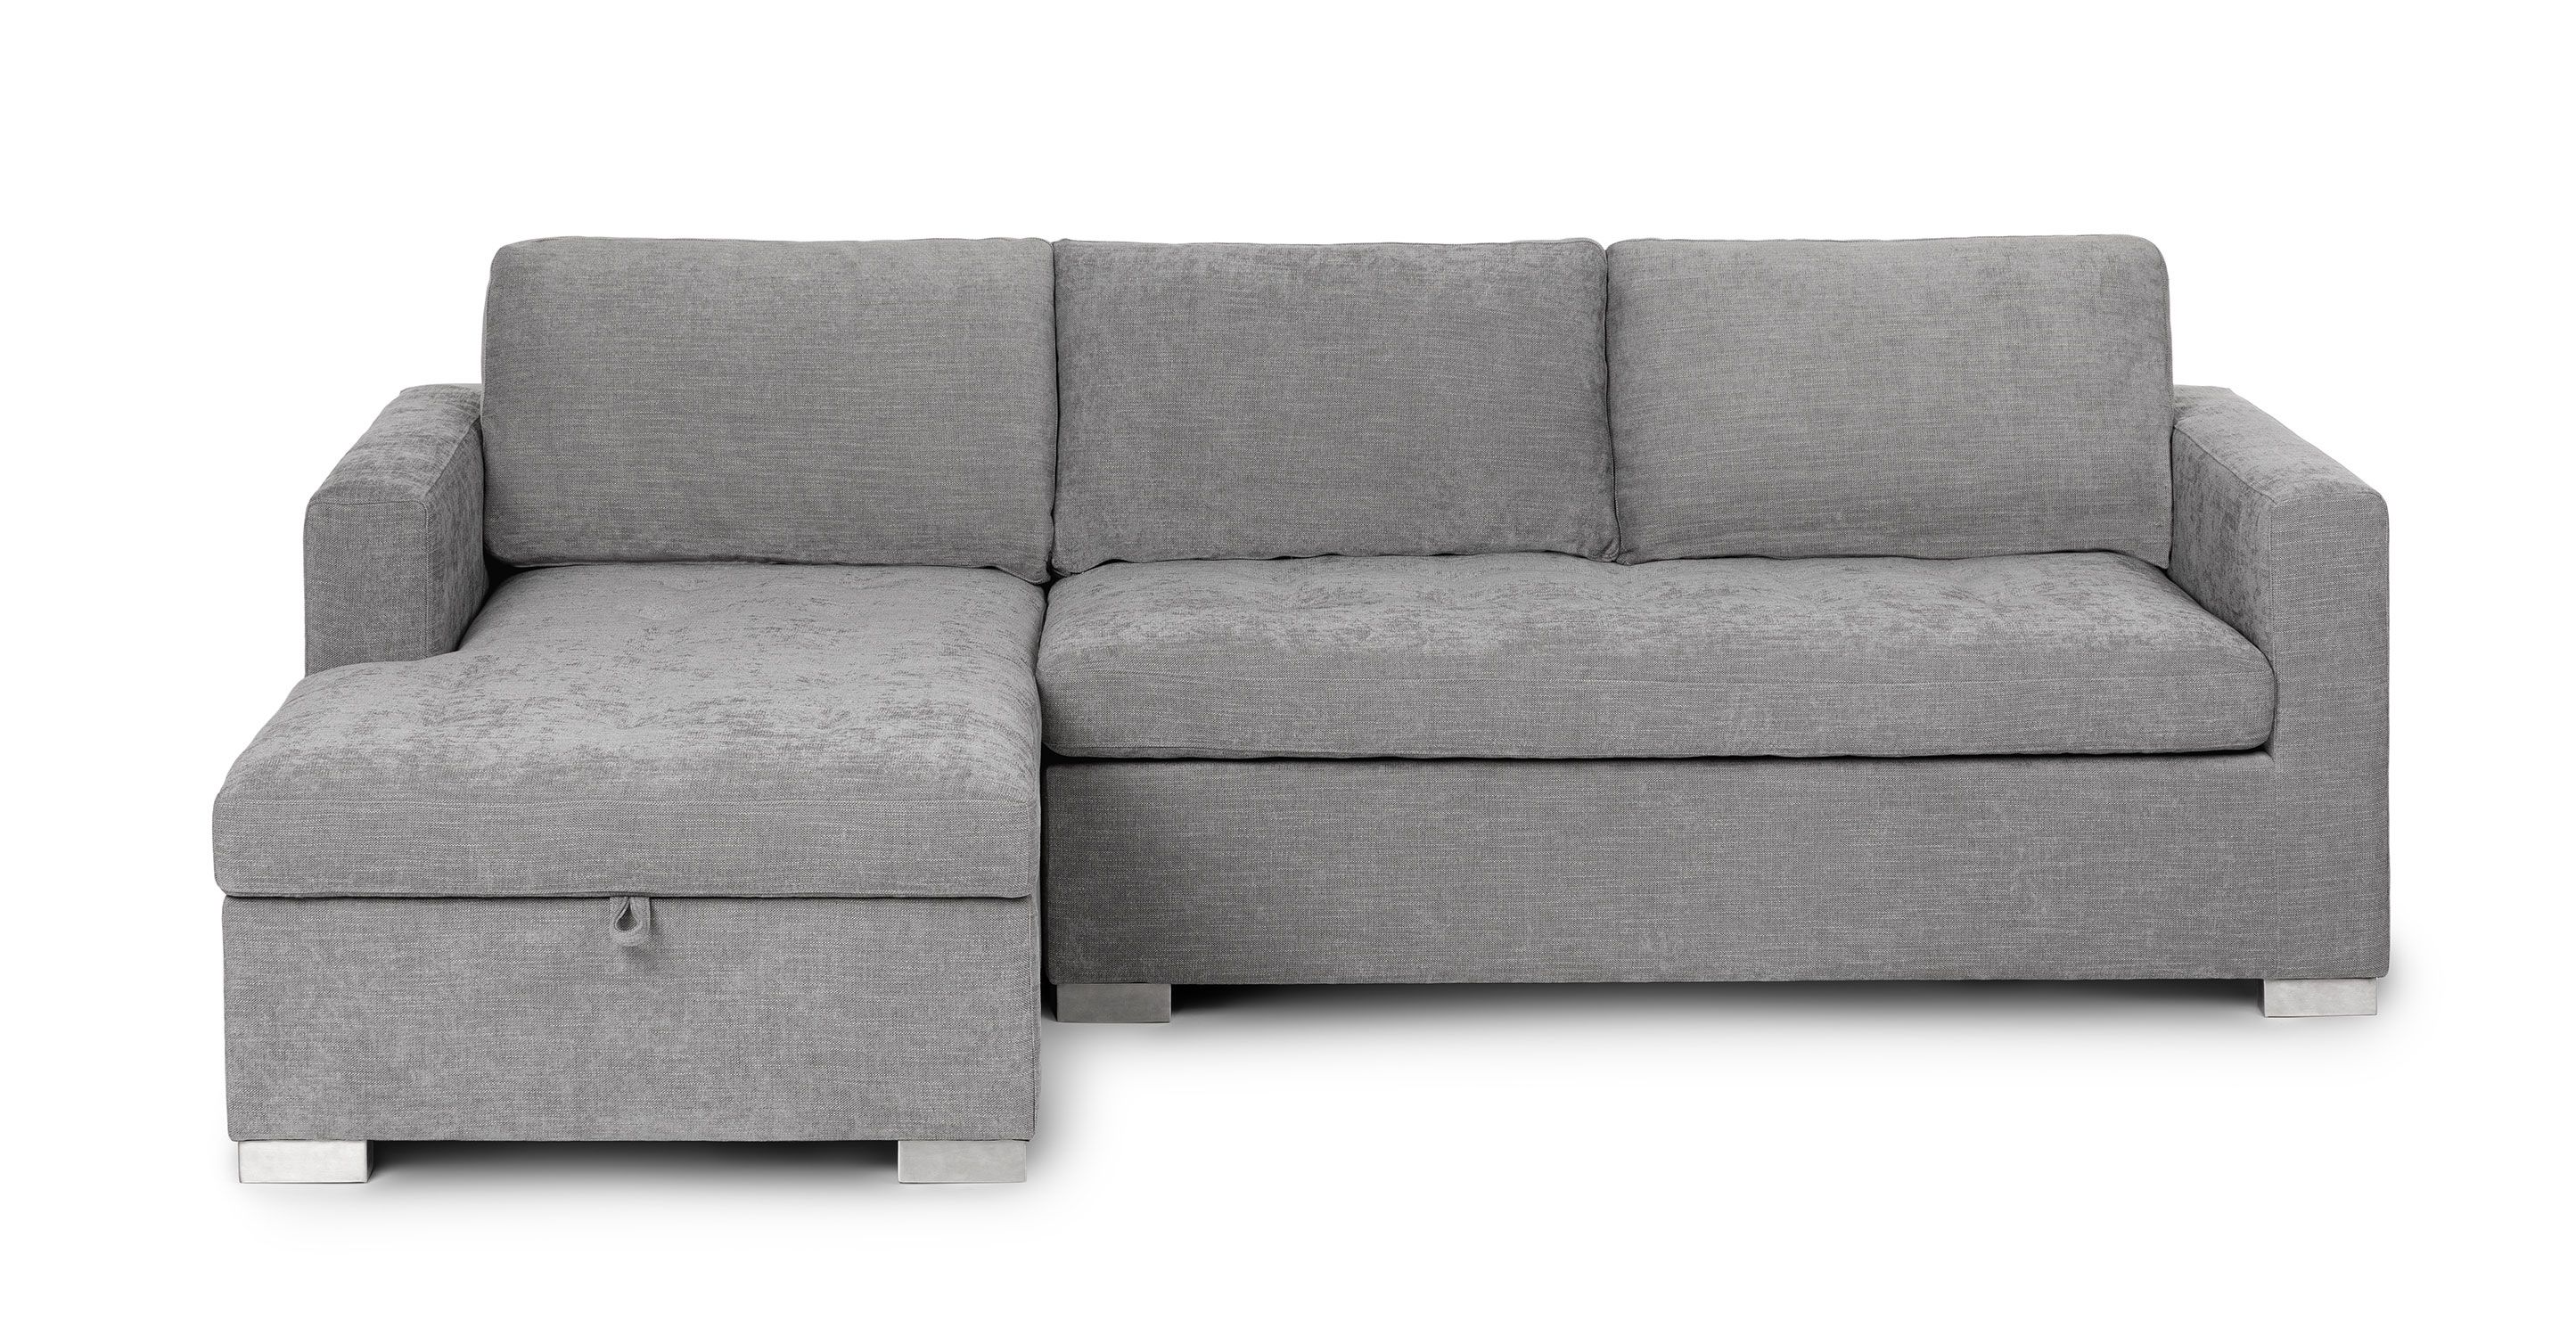 Right Facing Dawn Gray Fabric Sectional Sofa Bed | Soma | Article Regarding Sofa Beds With Right Chaise And Pillows (View 6 of 20)